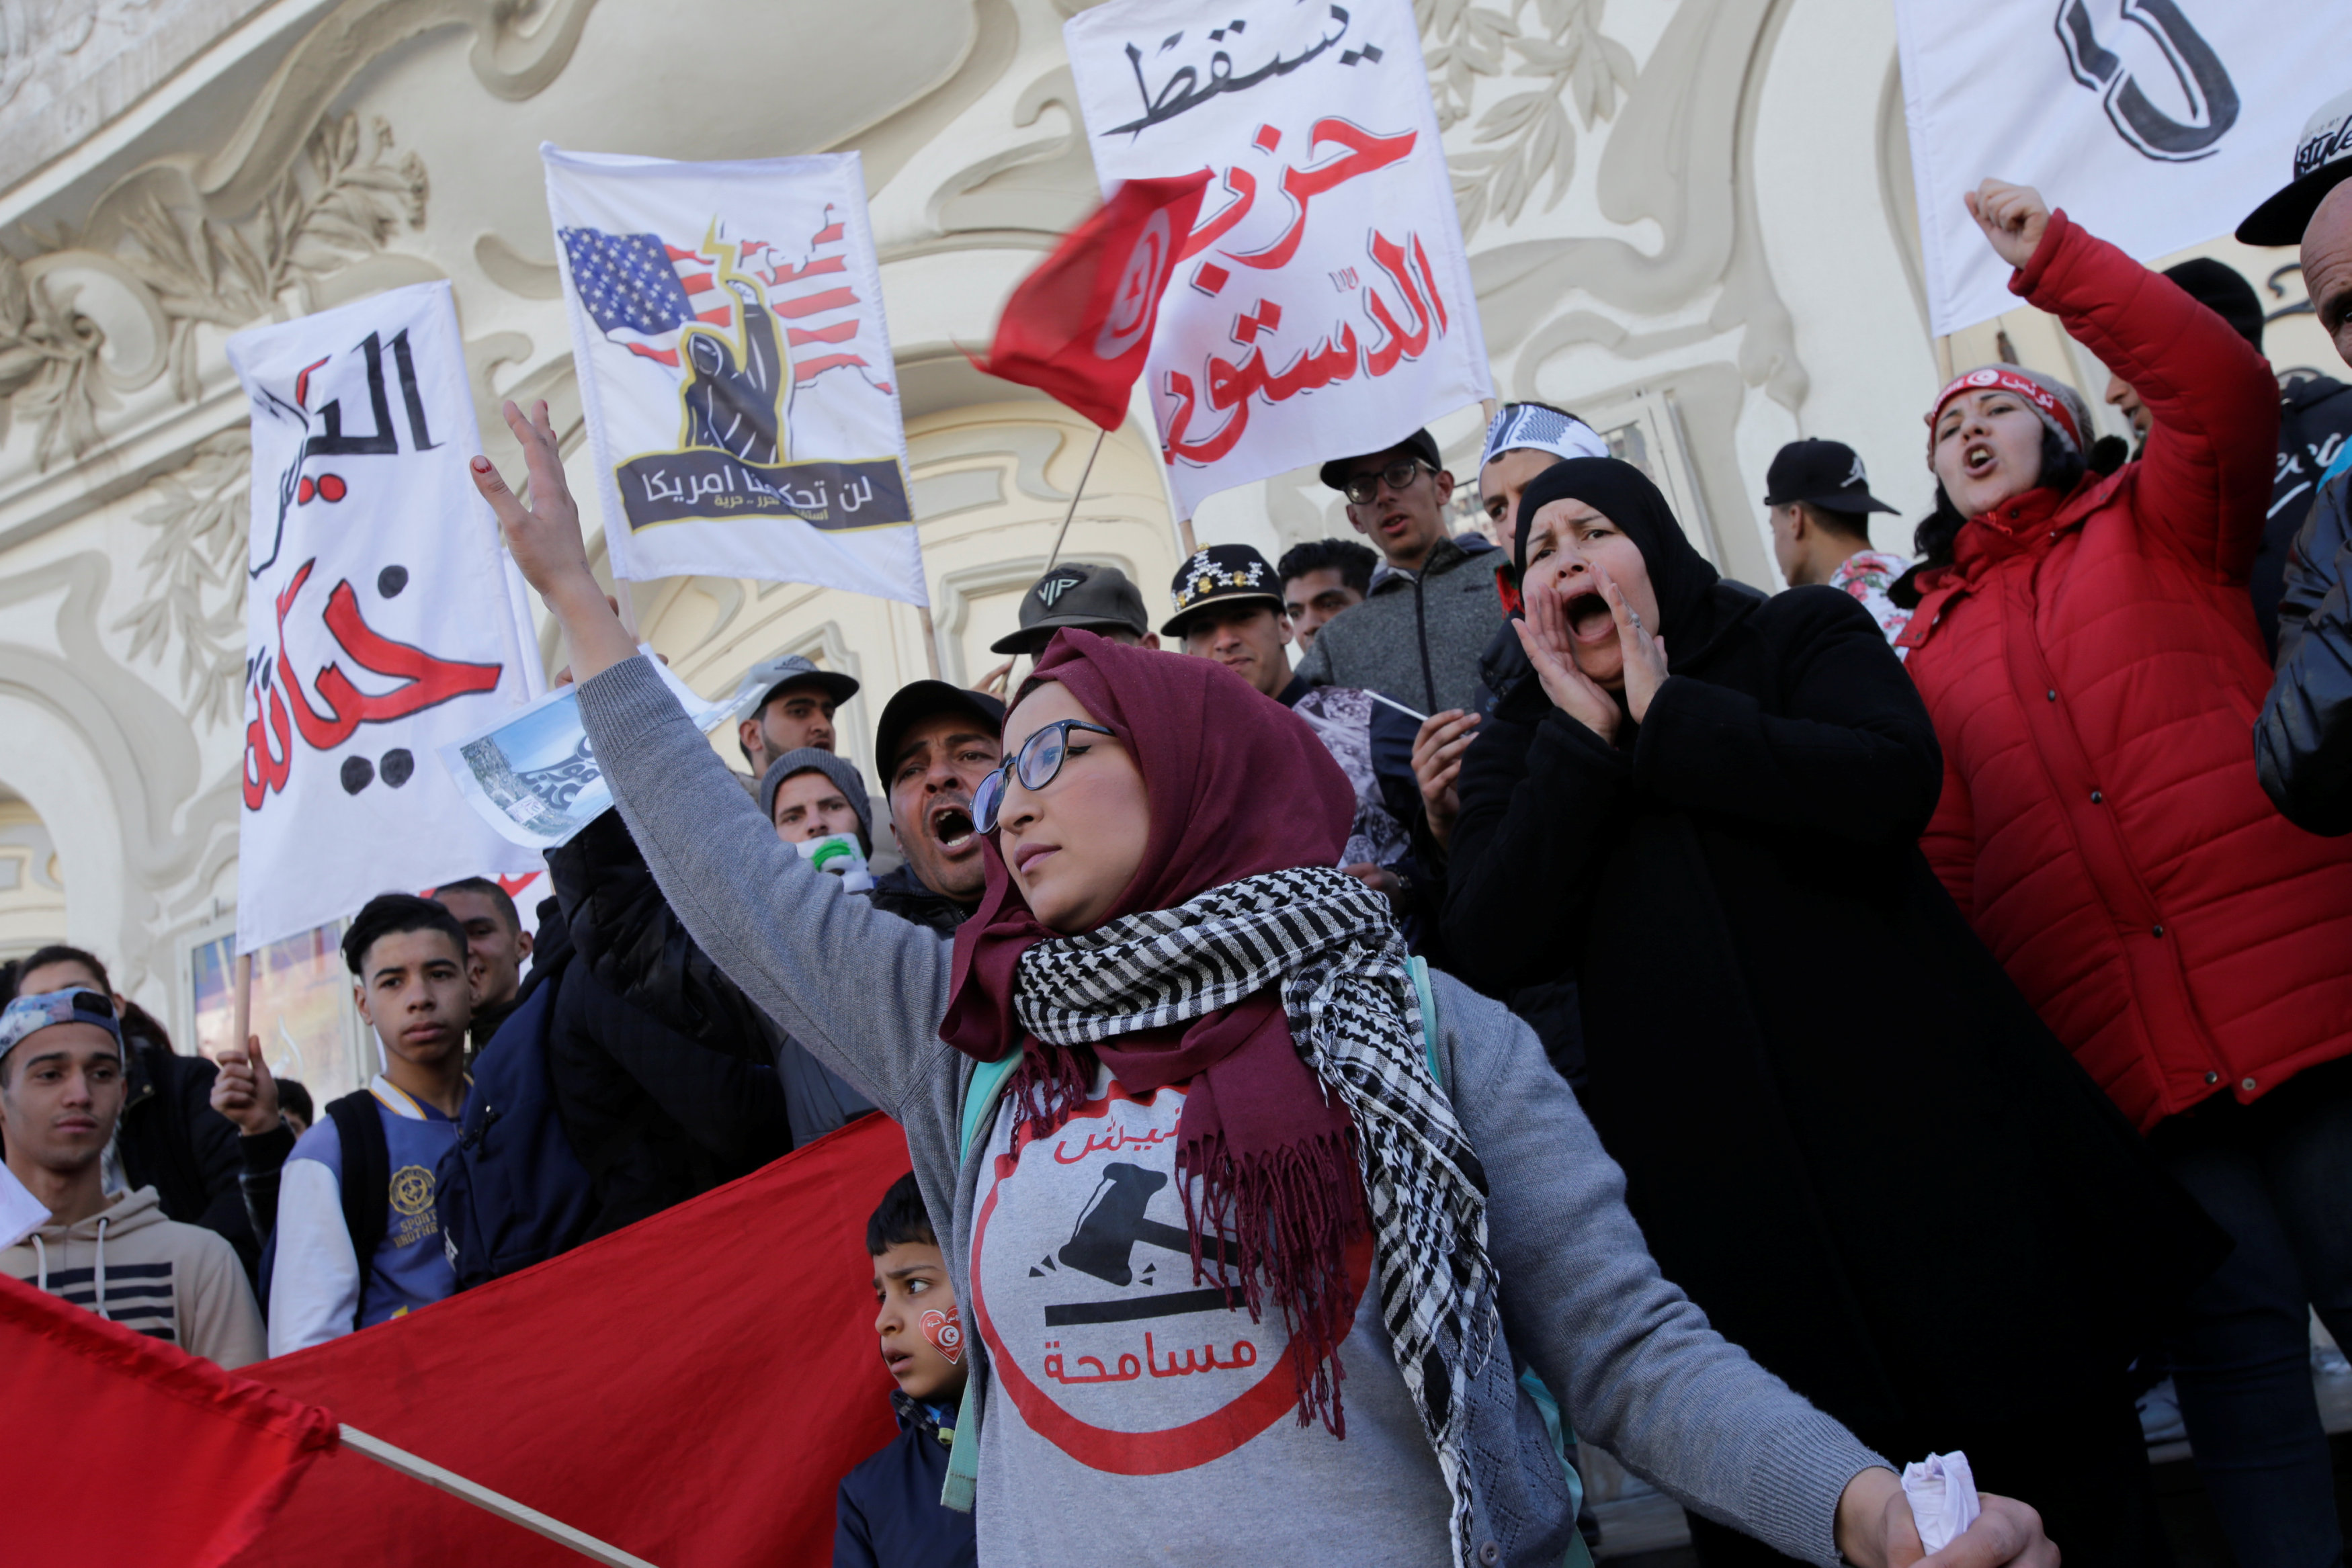 In pictures: Protests erupt in Tunisia